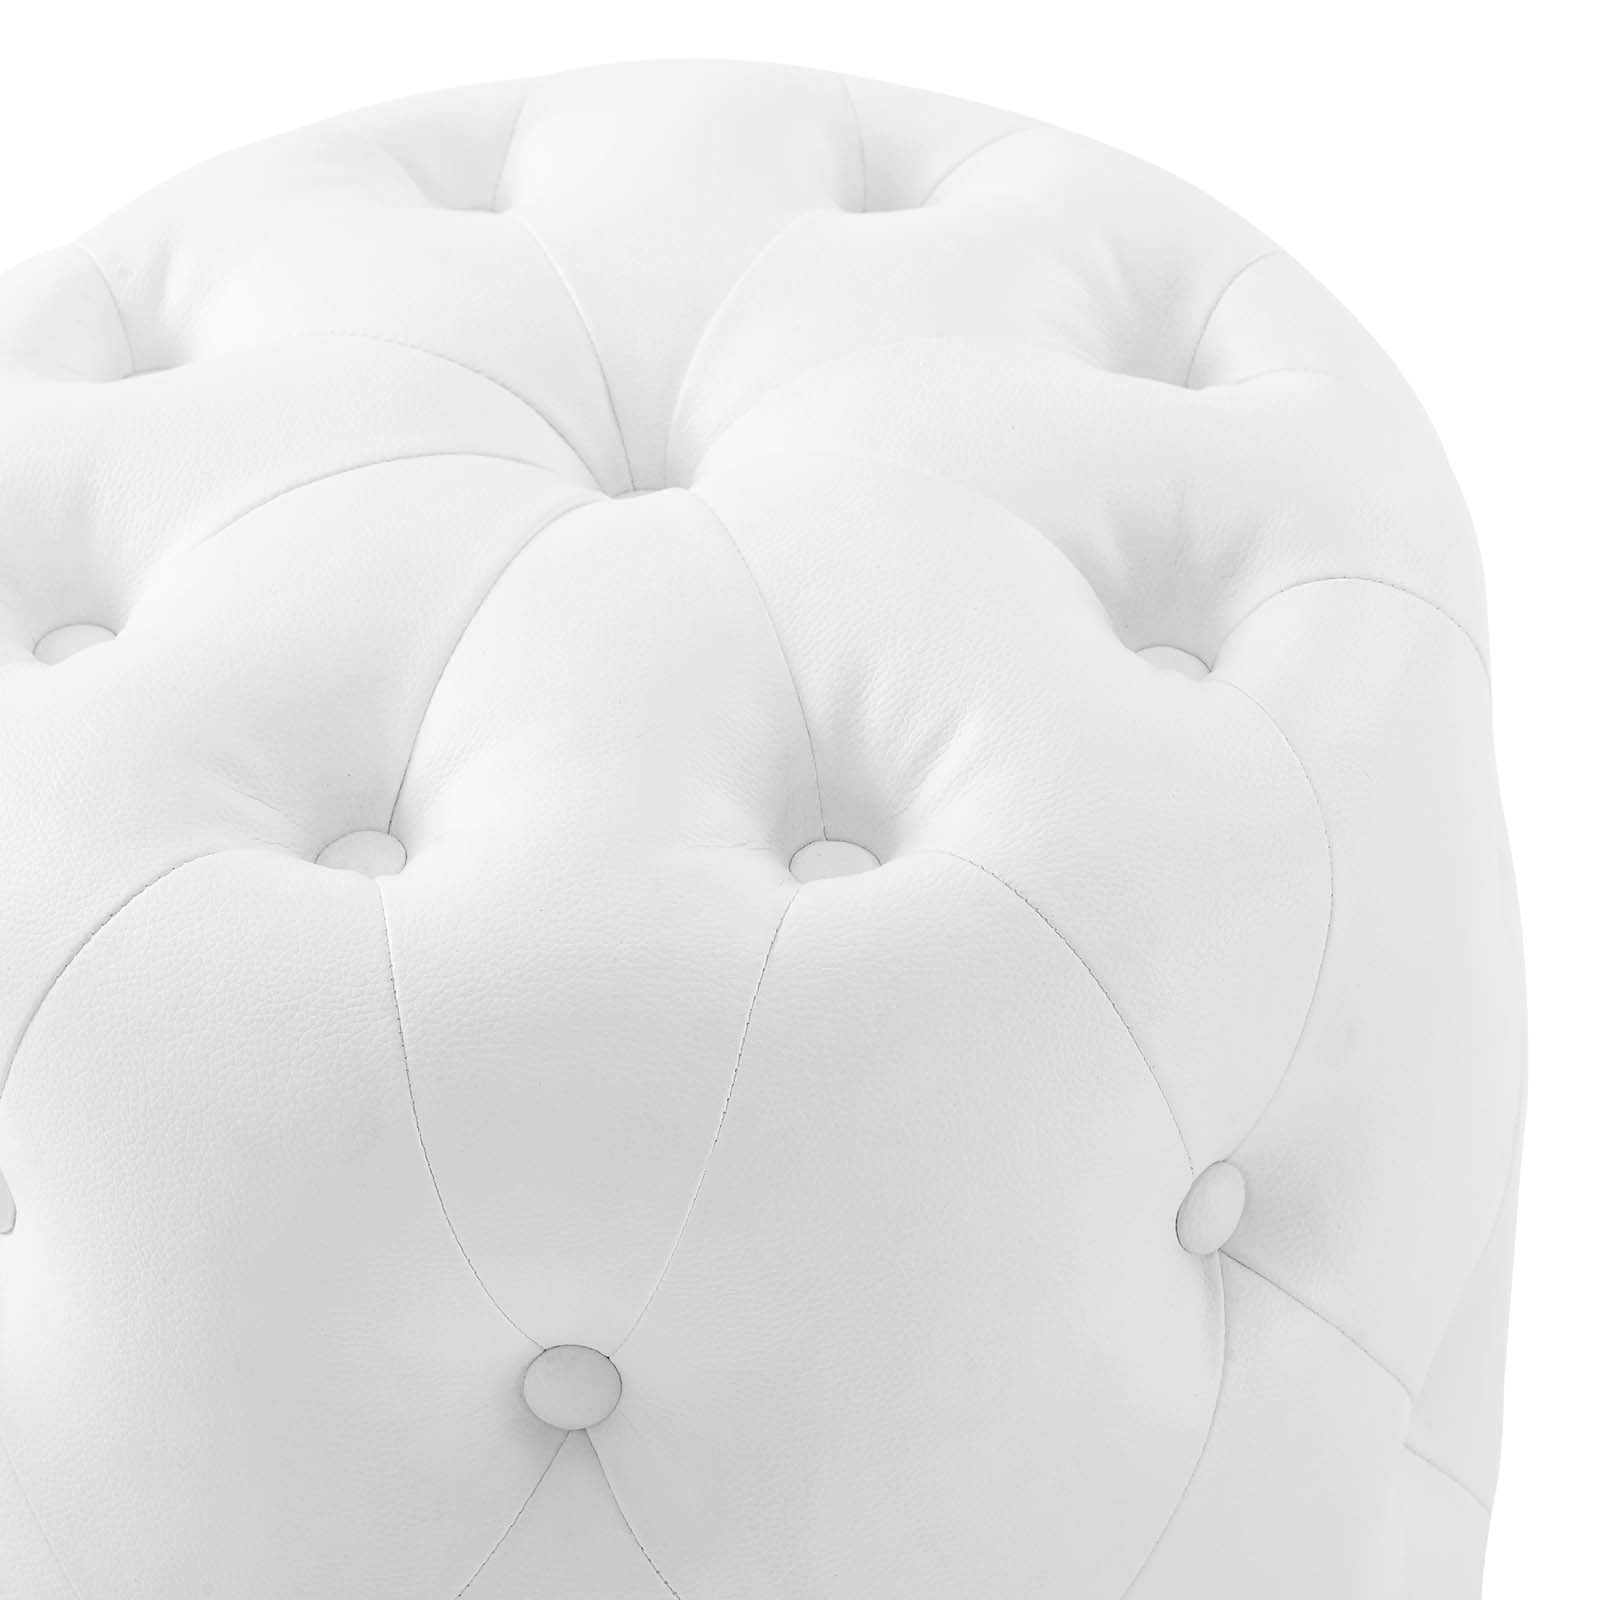 Amour Tufted Button Round Faux Leather Ottoman - East Shore Modern Home Furnishings